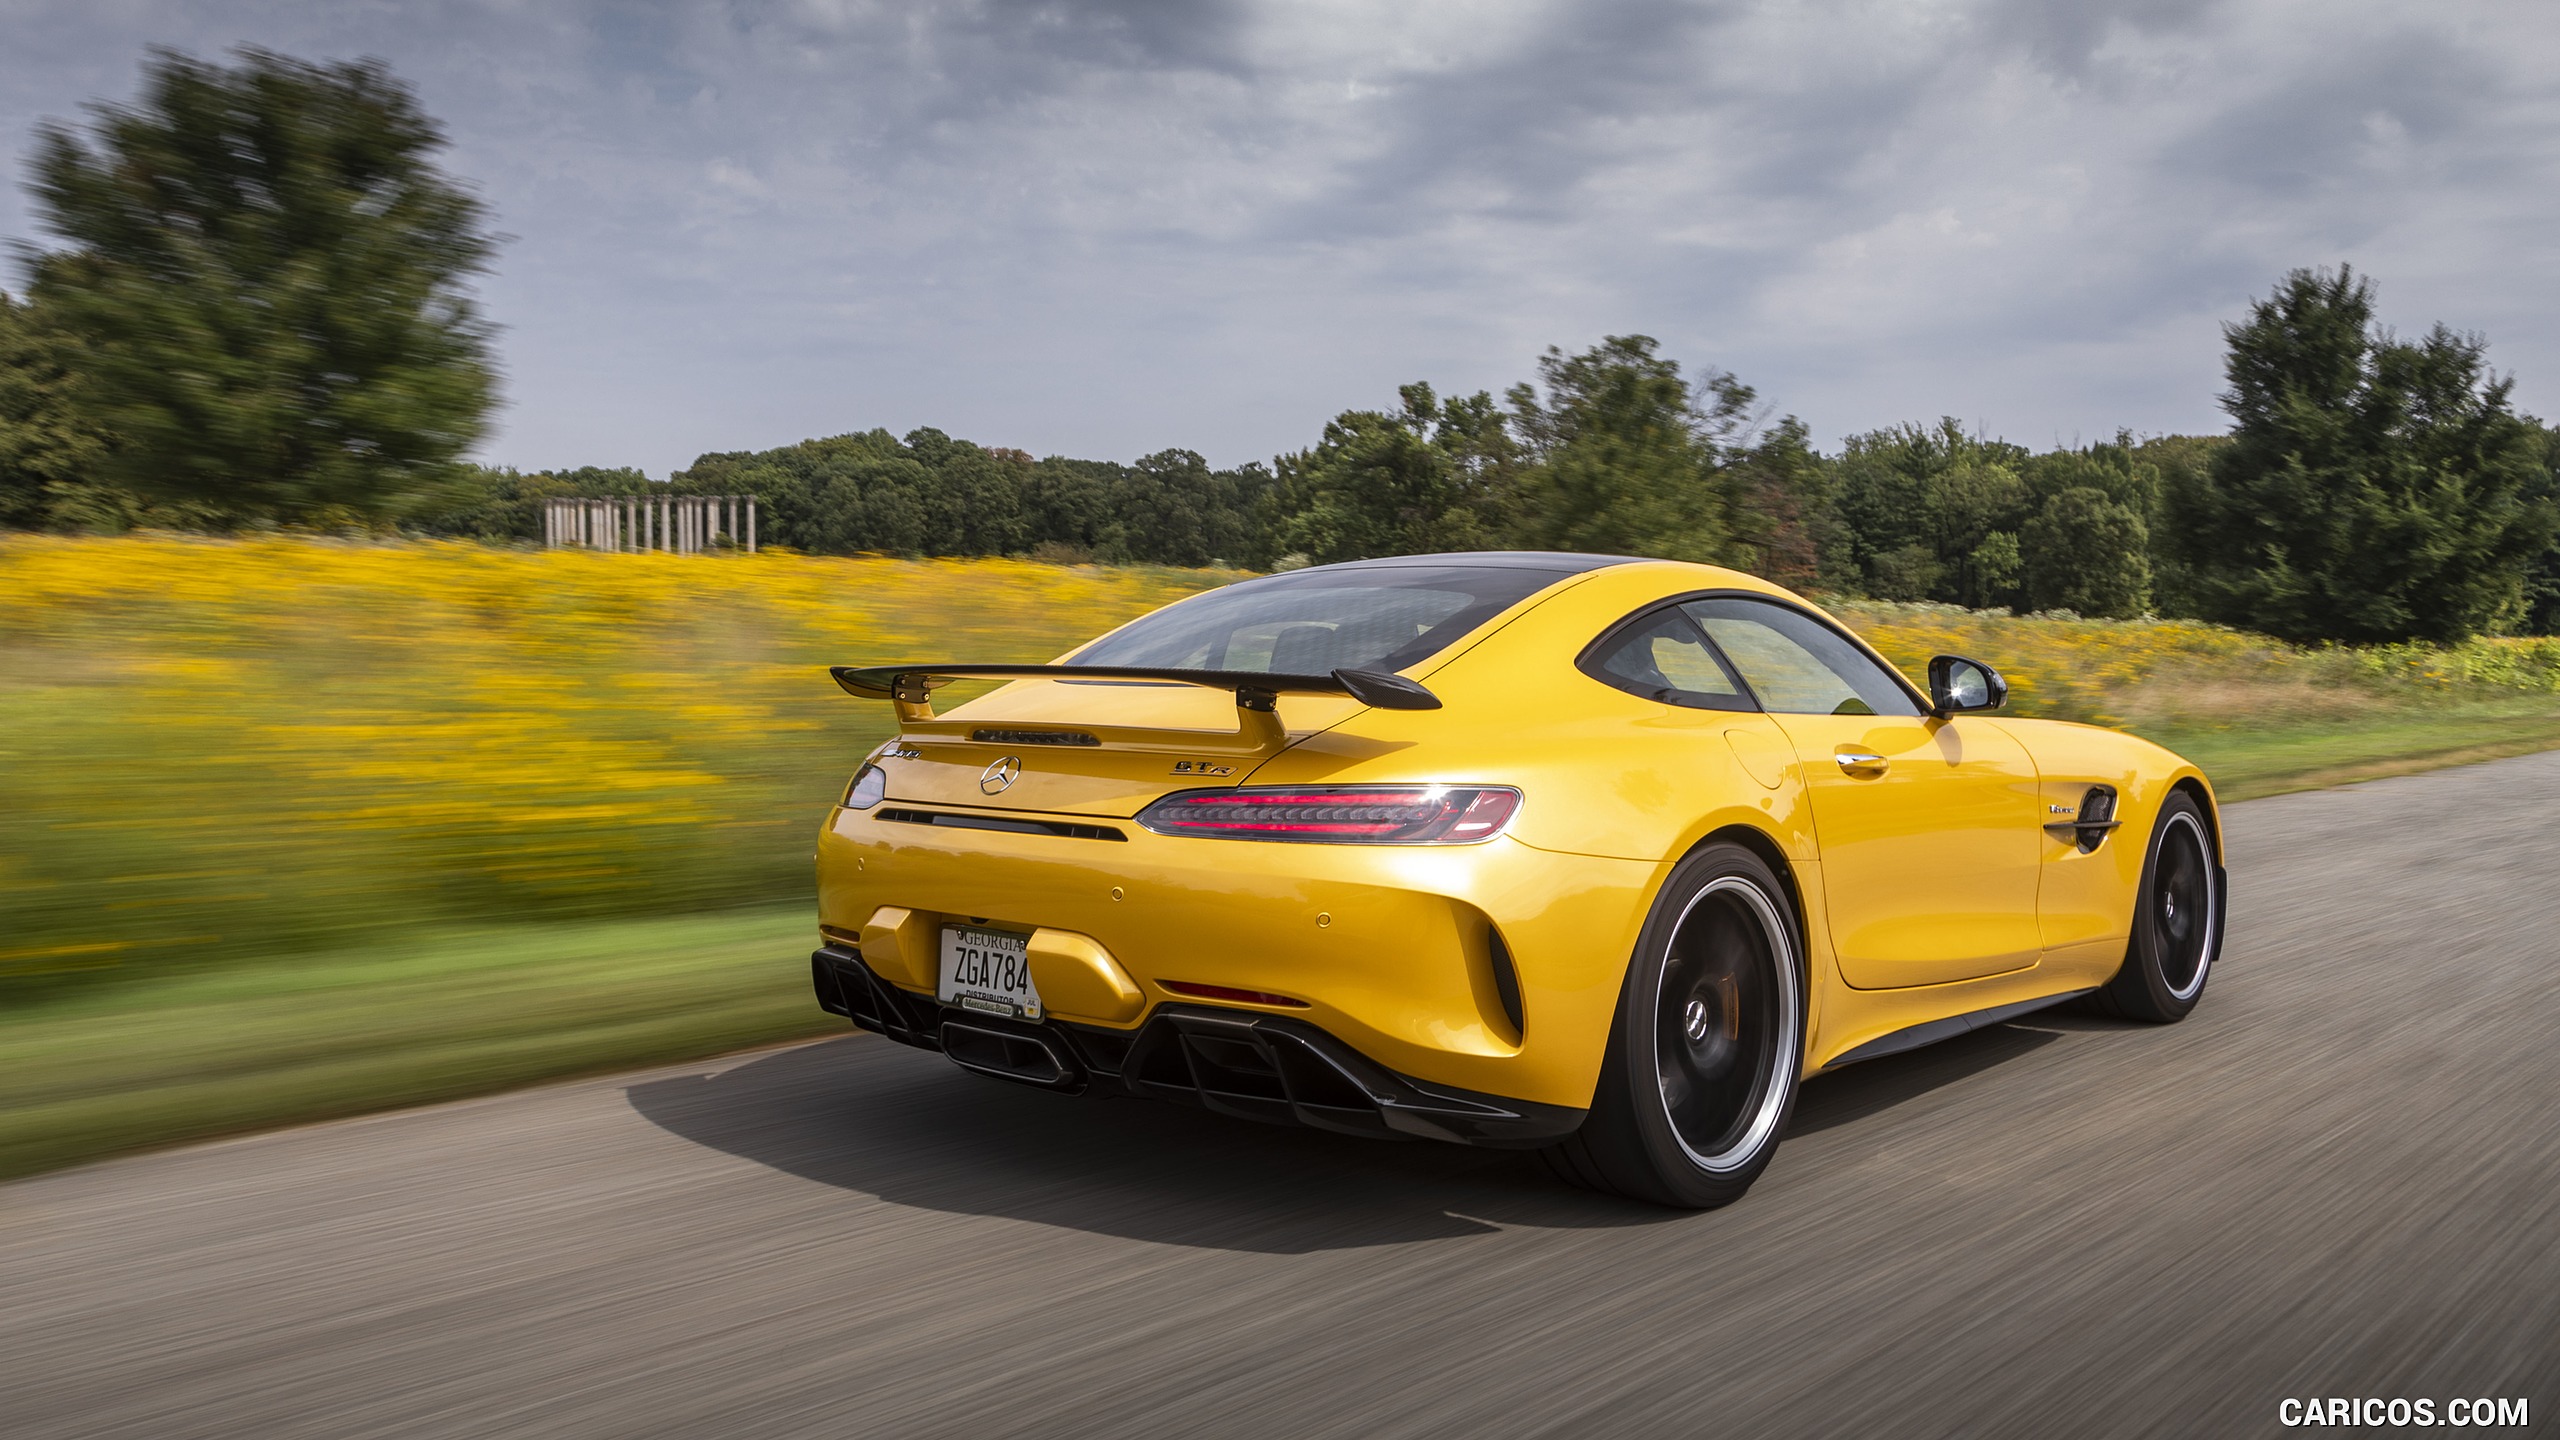 2020 Mercedes-AMG GT R Coupe (US-Spec) - Rear Three-Quarter, #252 of 328